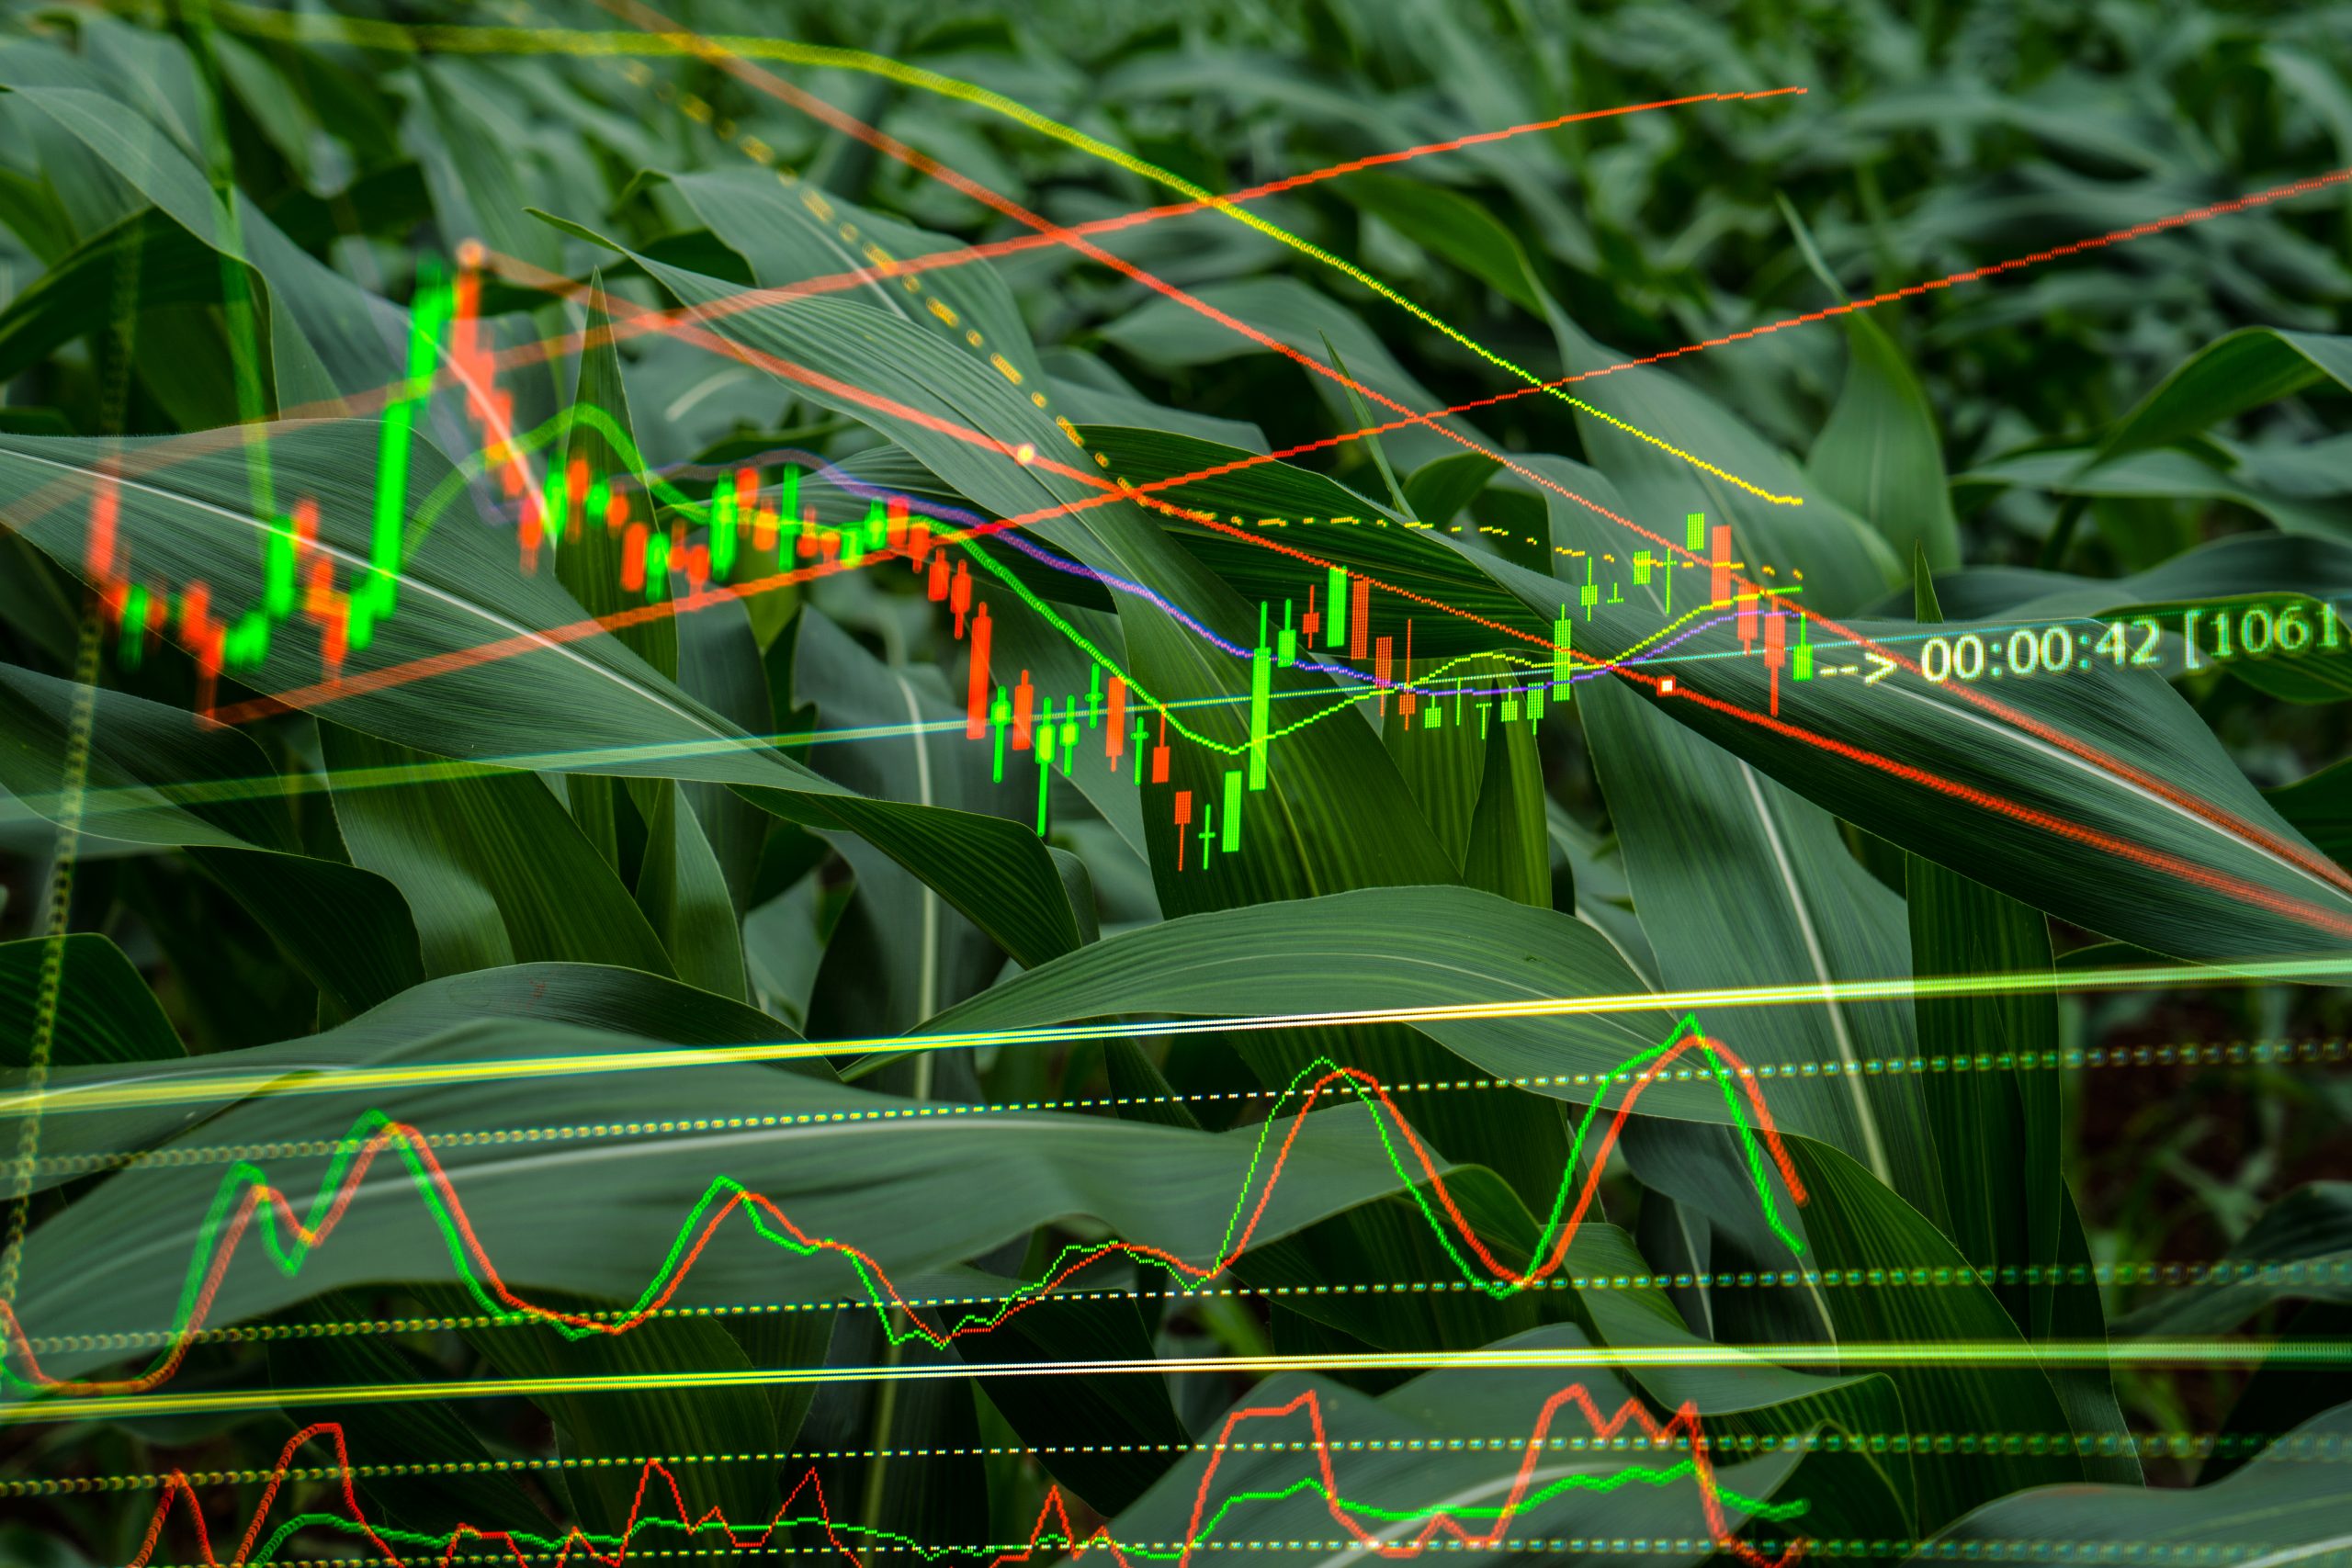 Financial data overlaid onto an image of corn crops